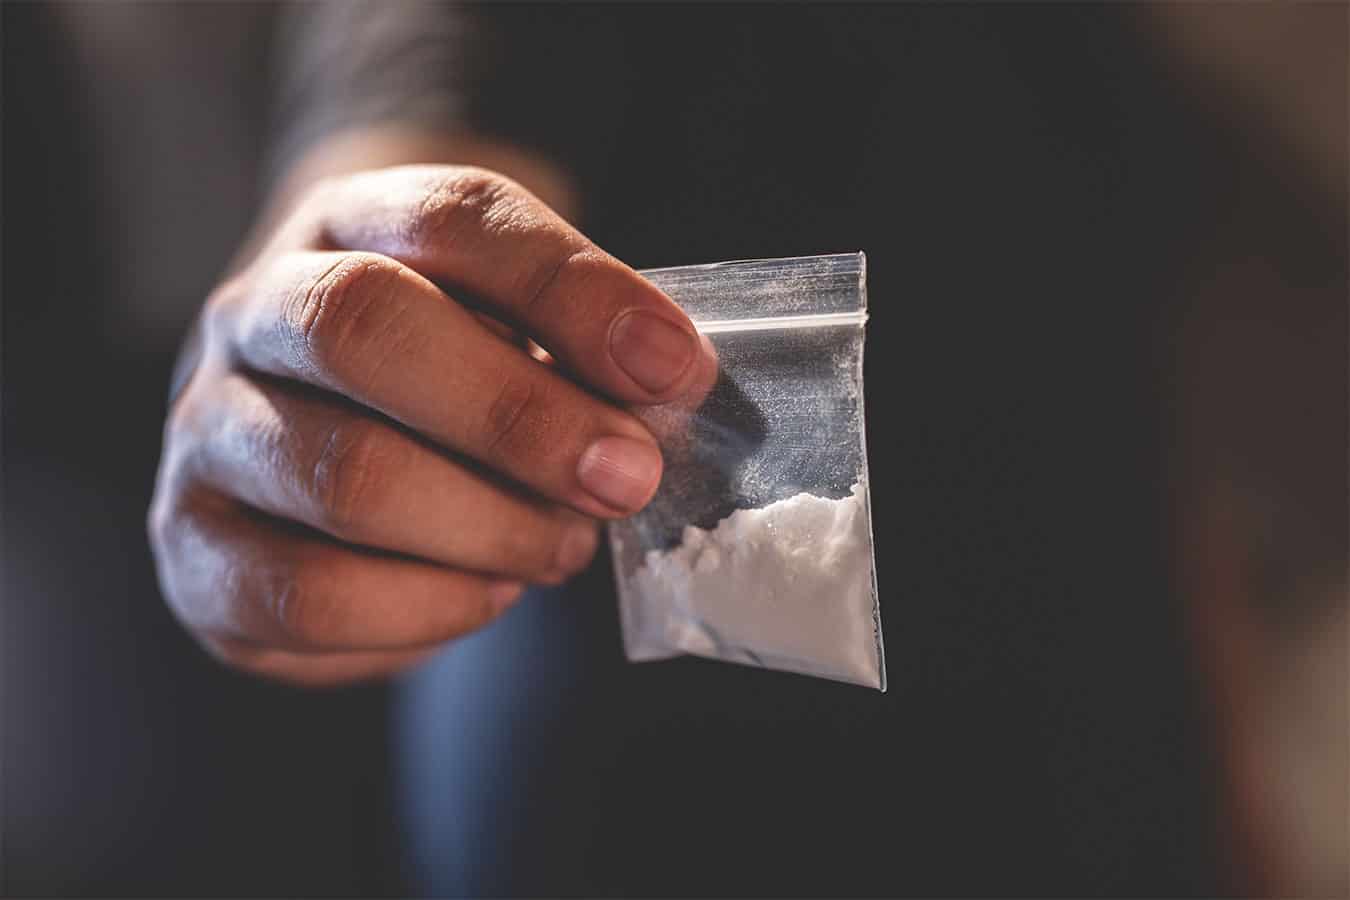 Someone holding a bag of drugs